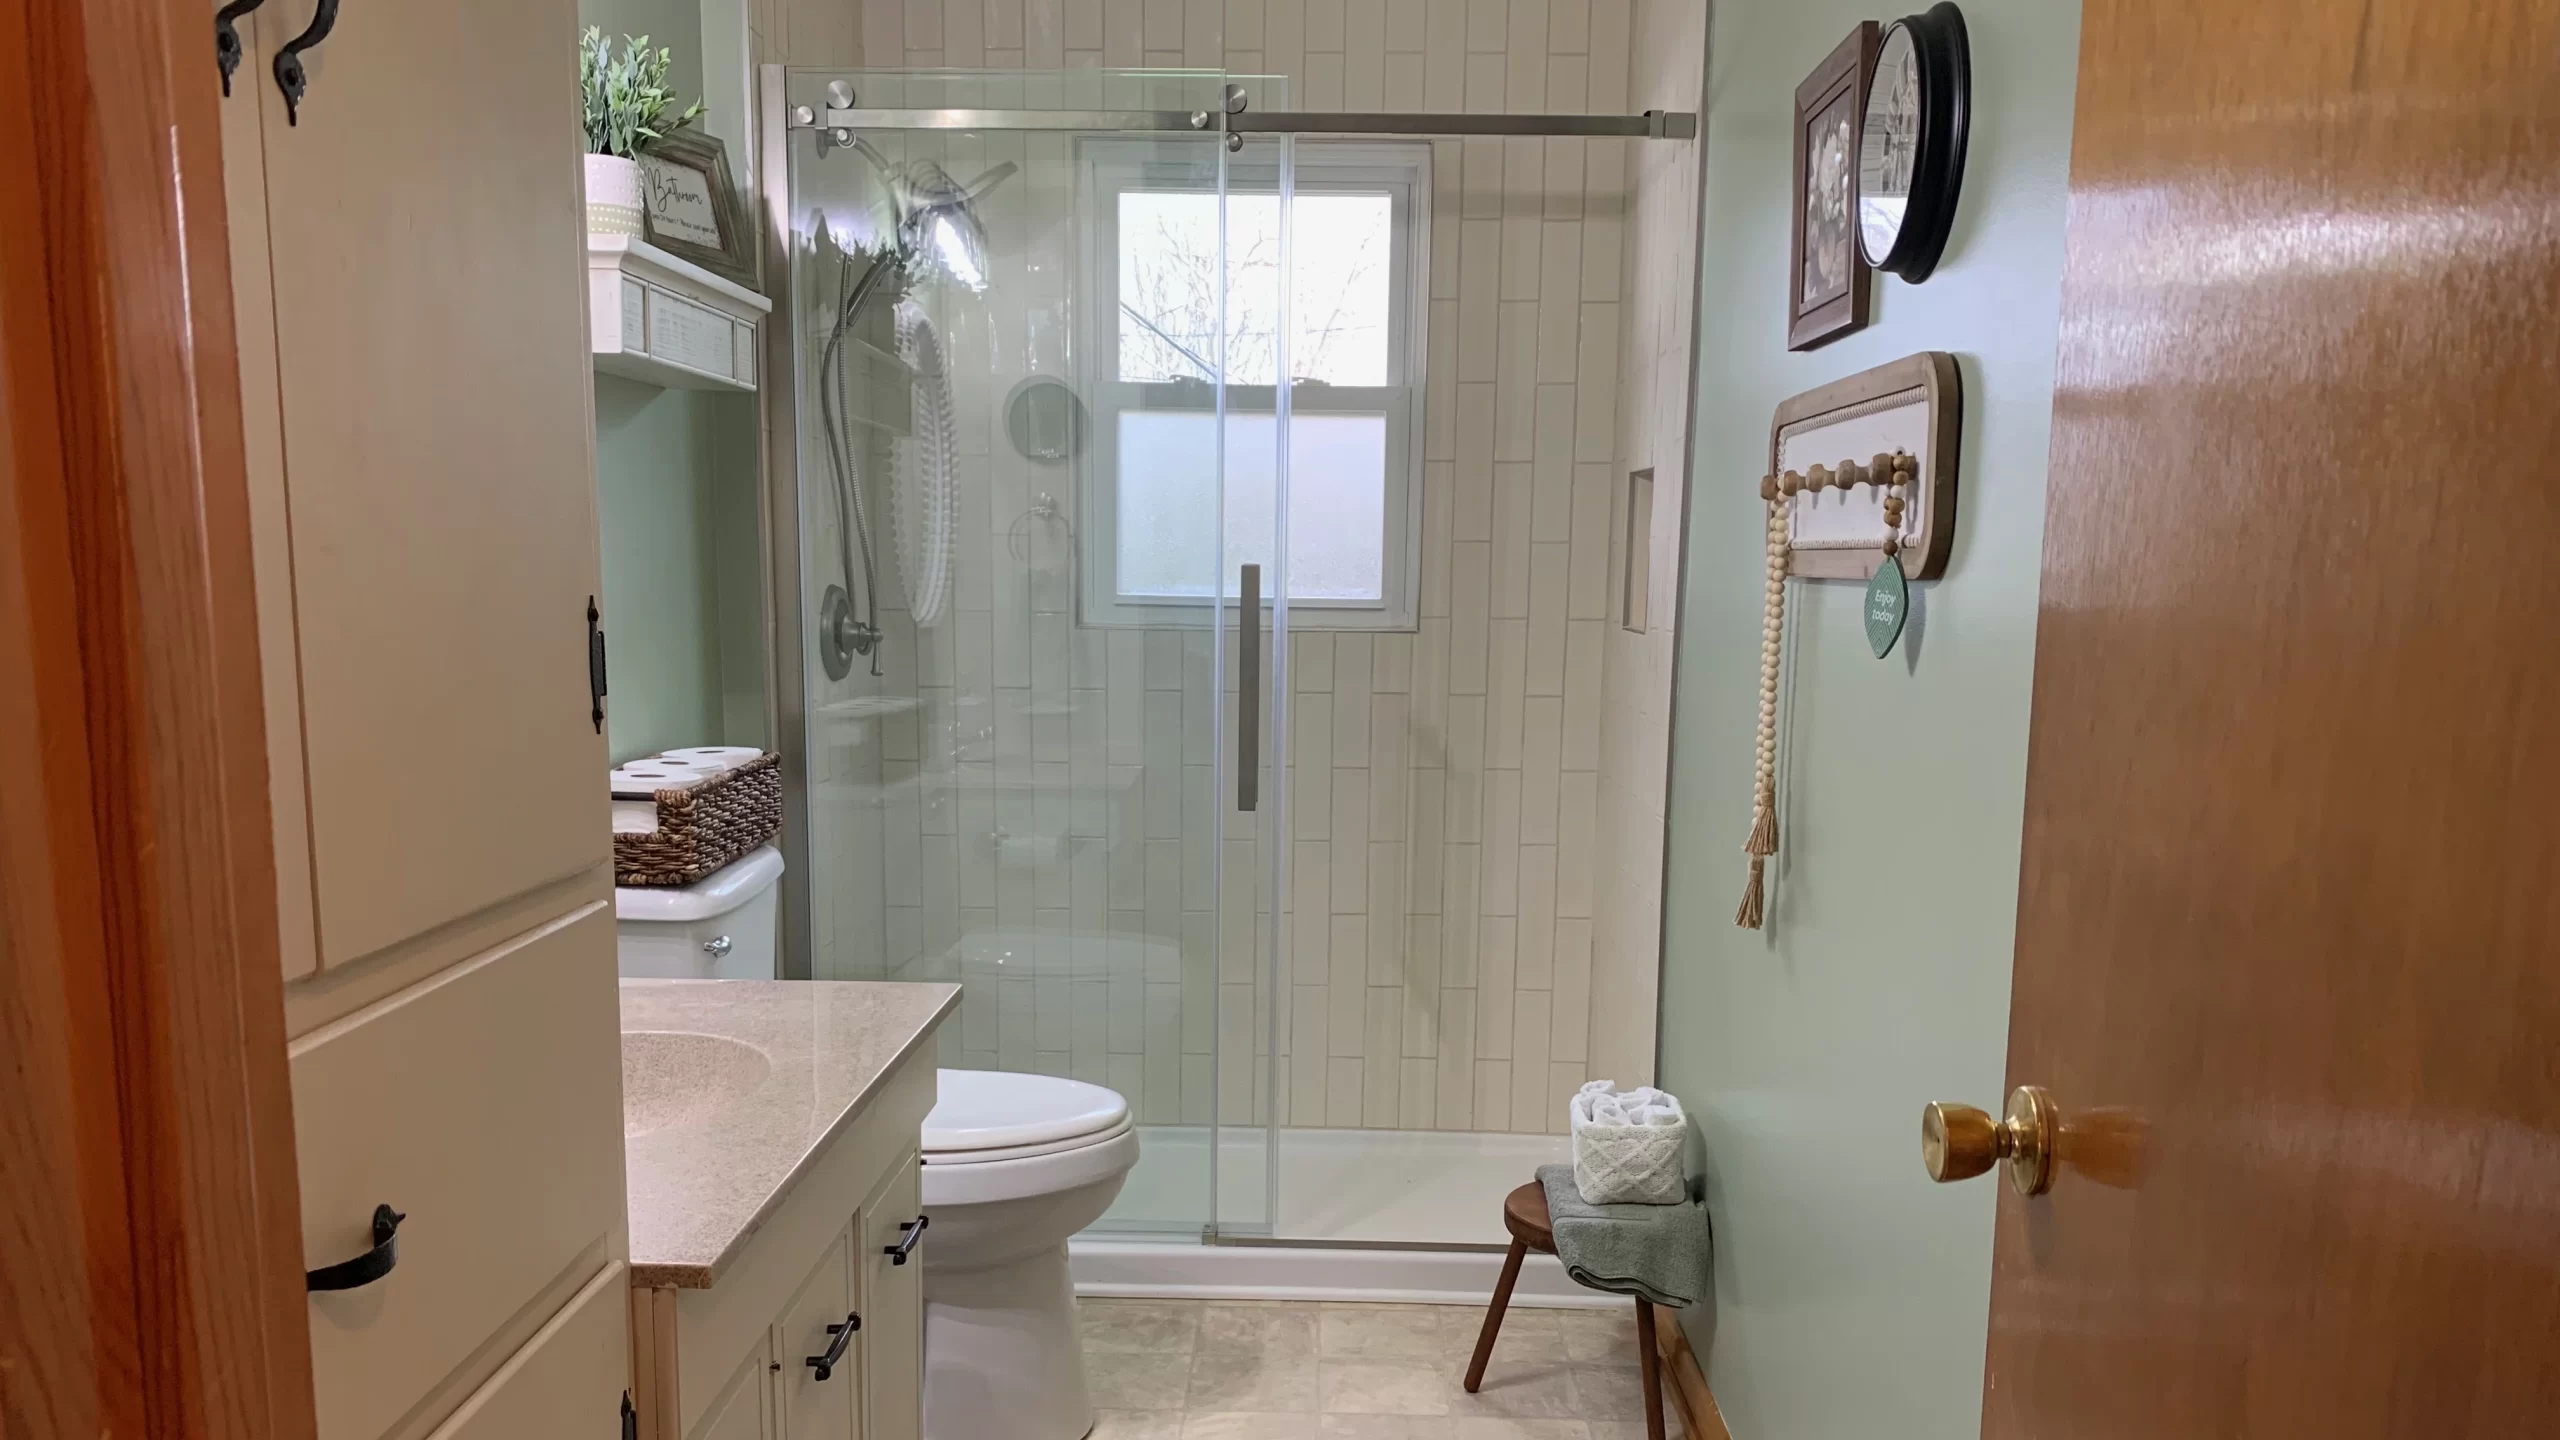 a completed bathroom renovation that has light green walls and a new tiled shower